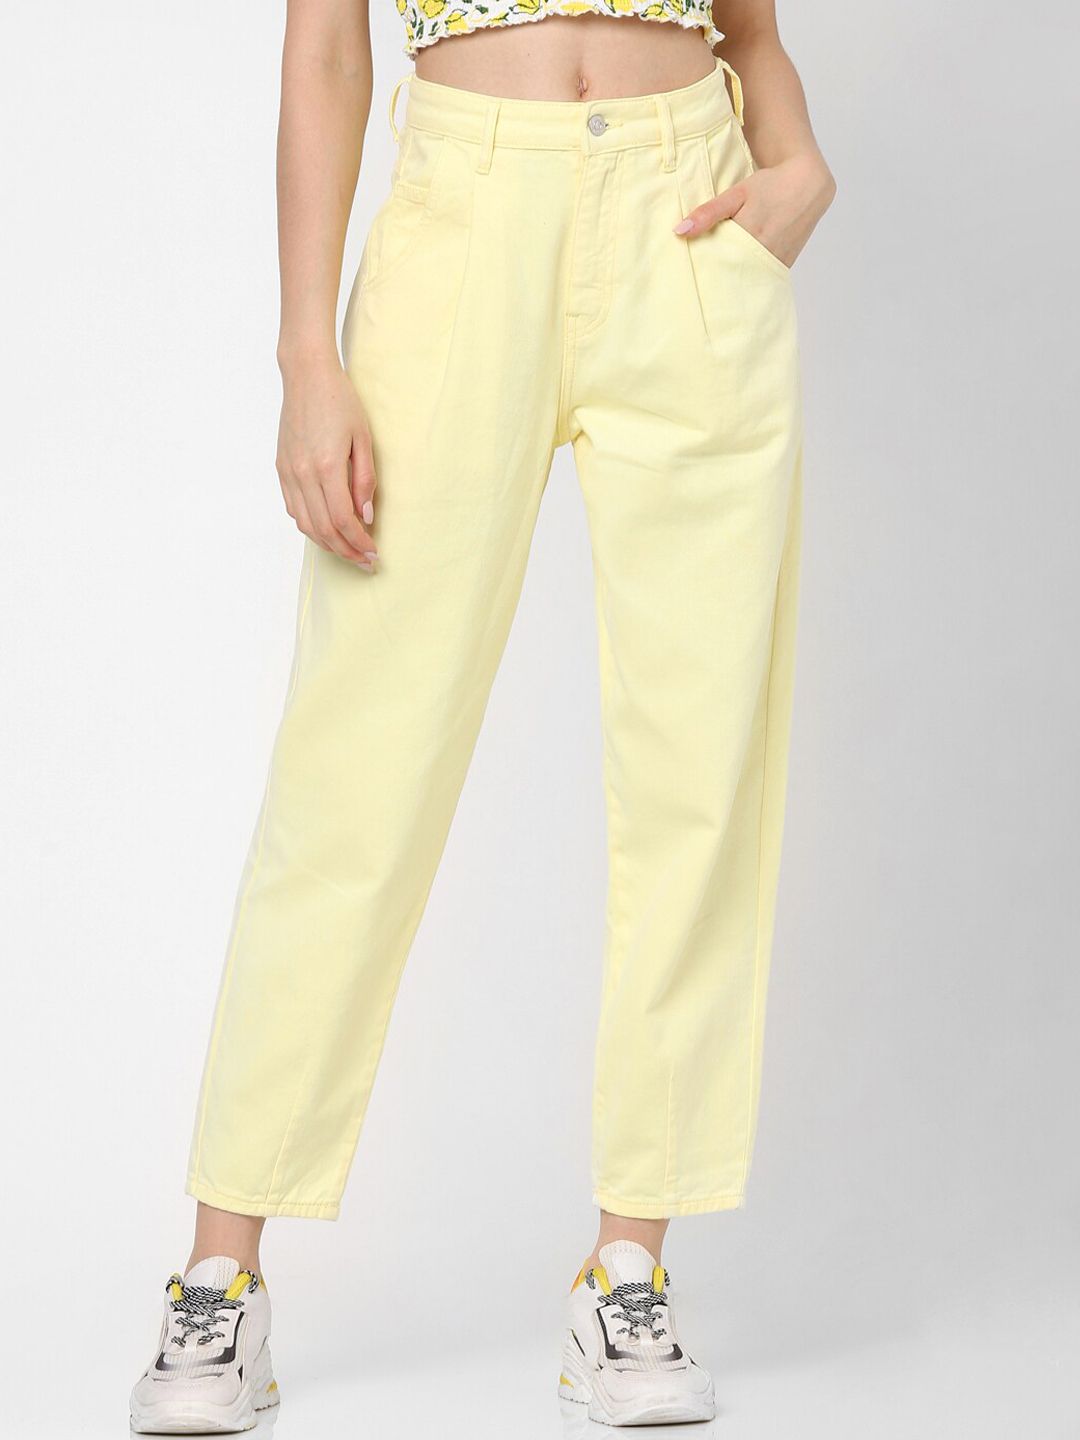 ONLY Women Yellow Straight Fit High-Rise Cotton Jeans Price in India